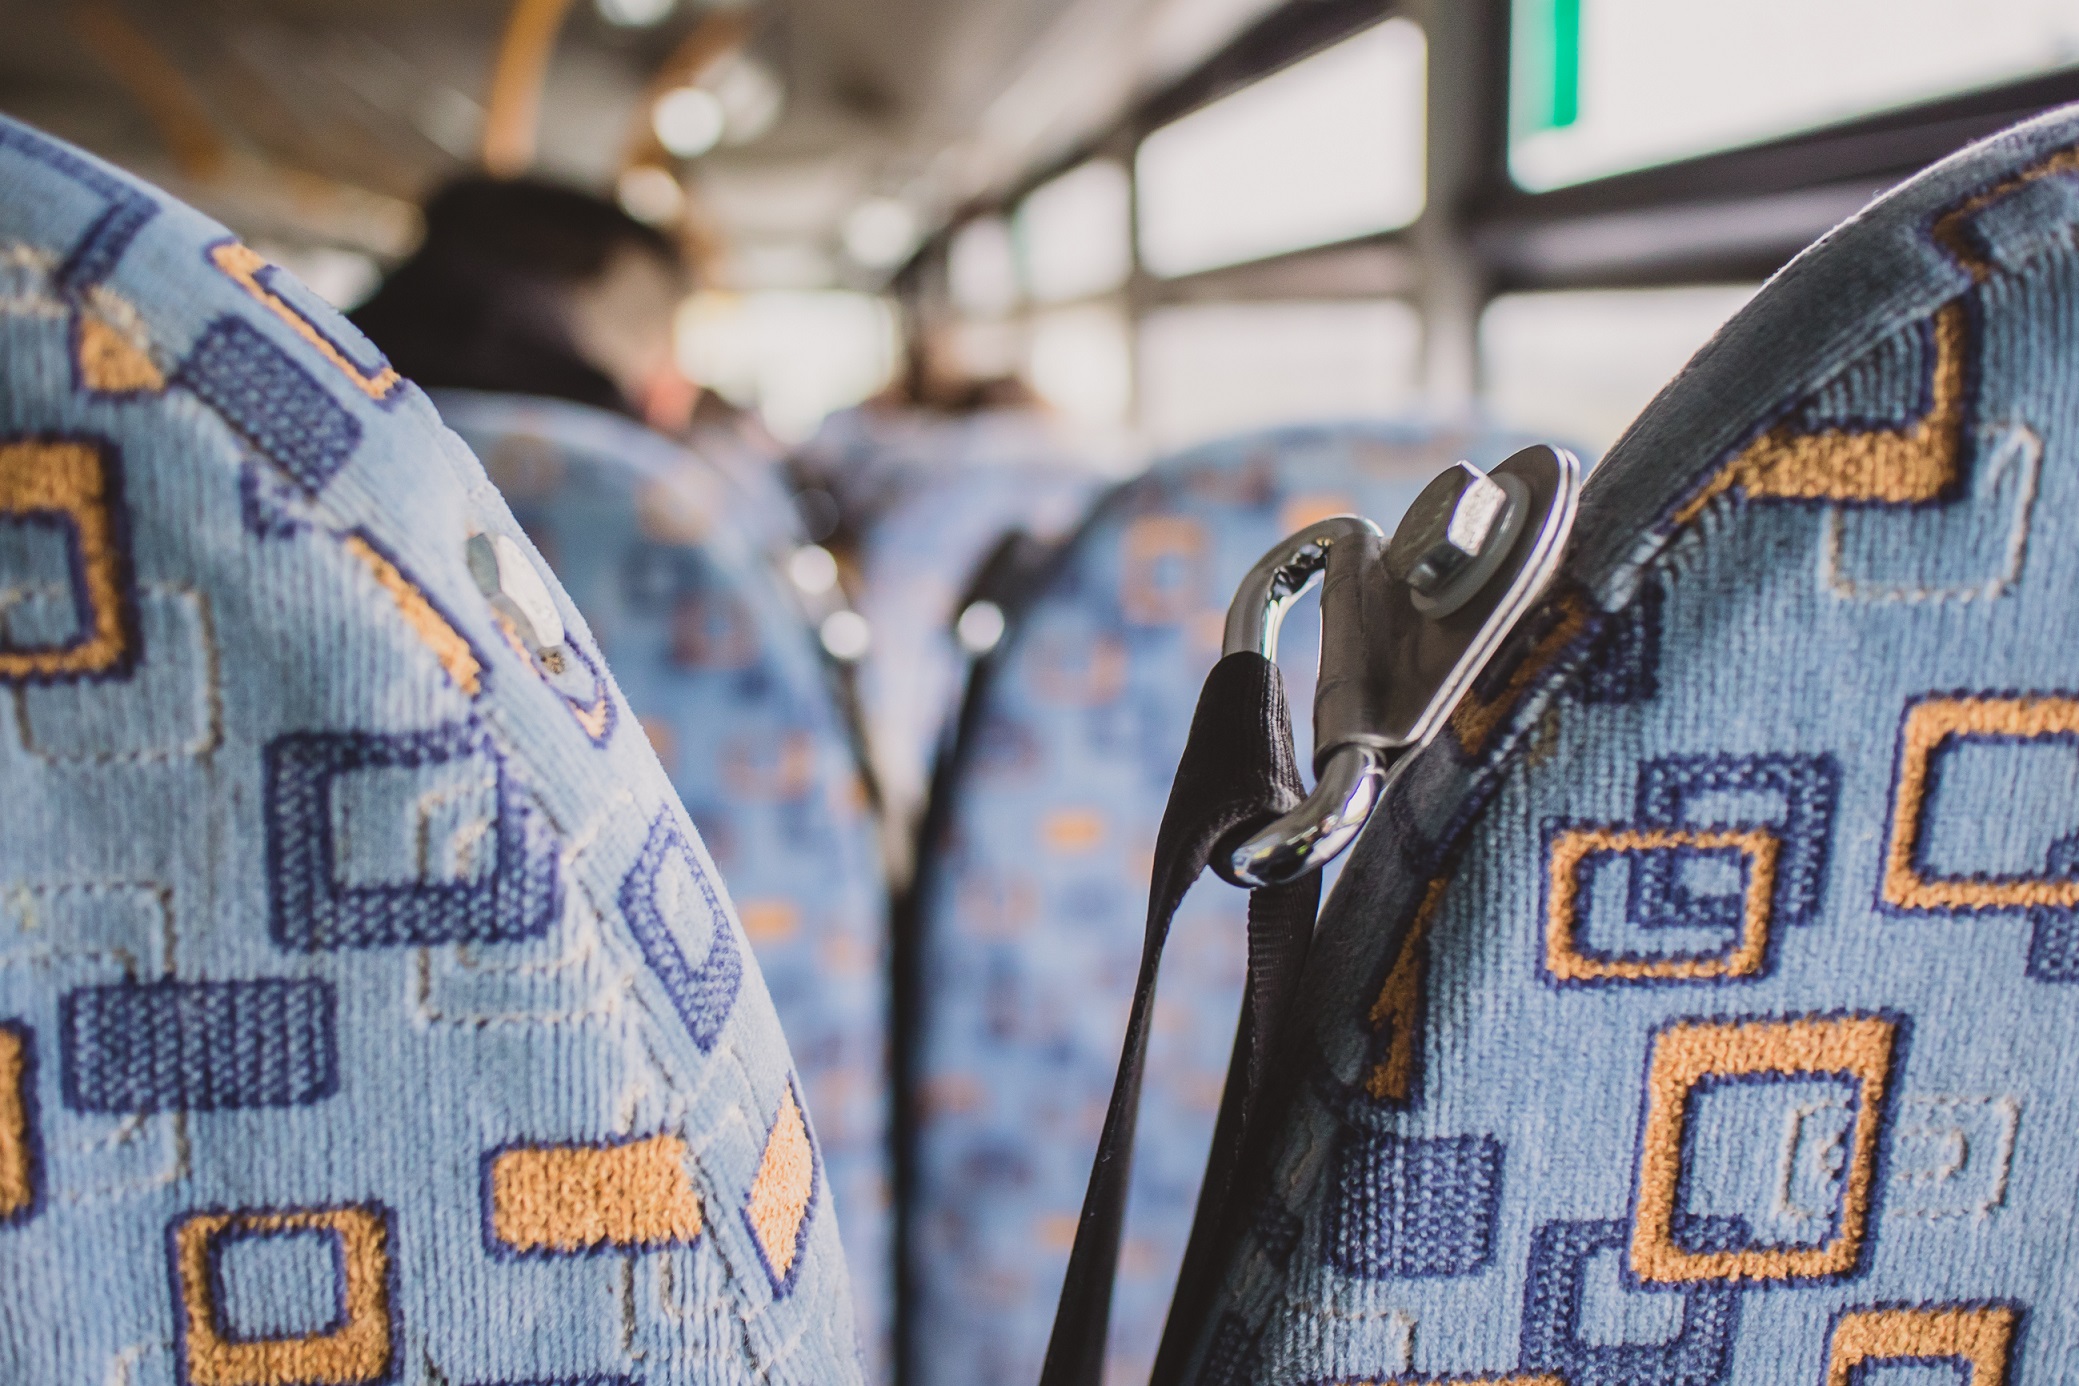 Coach and bus seatbelt requirements underlined by DVSA